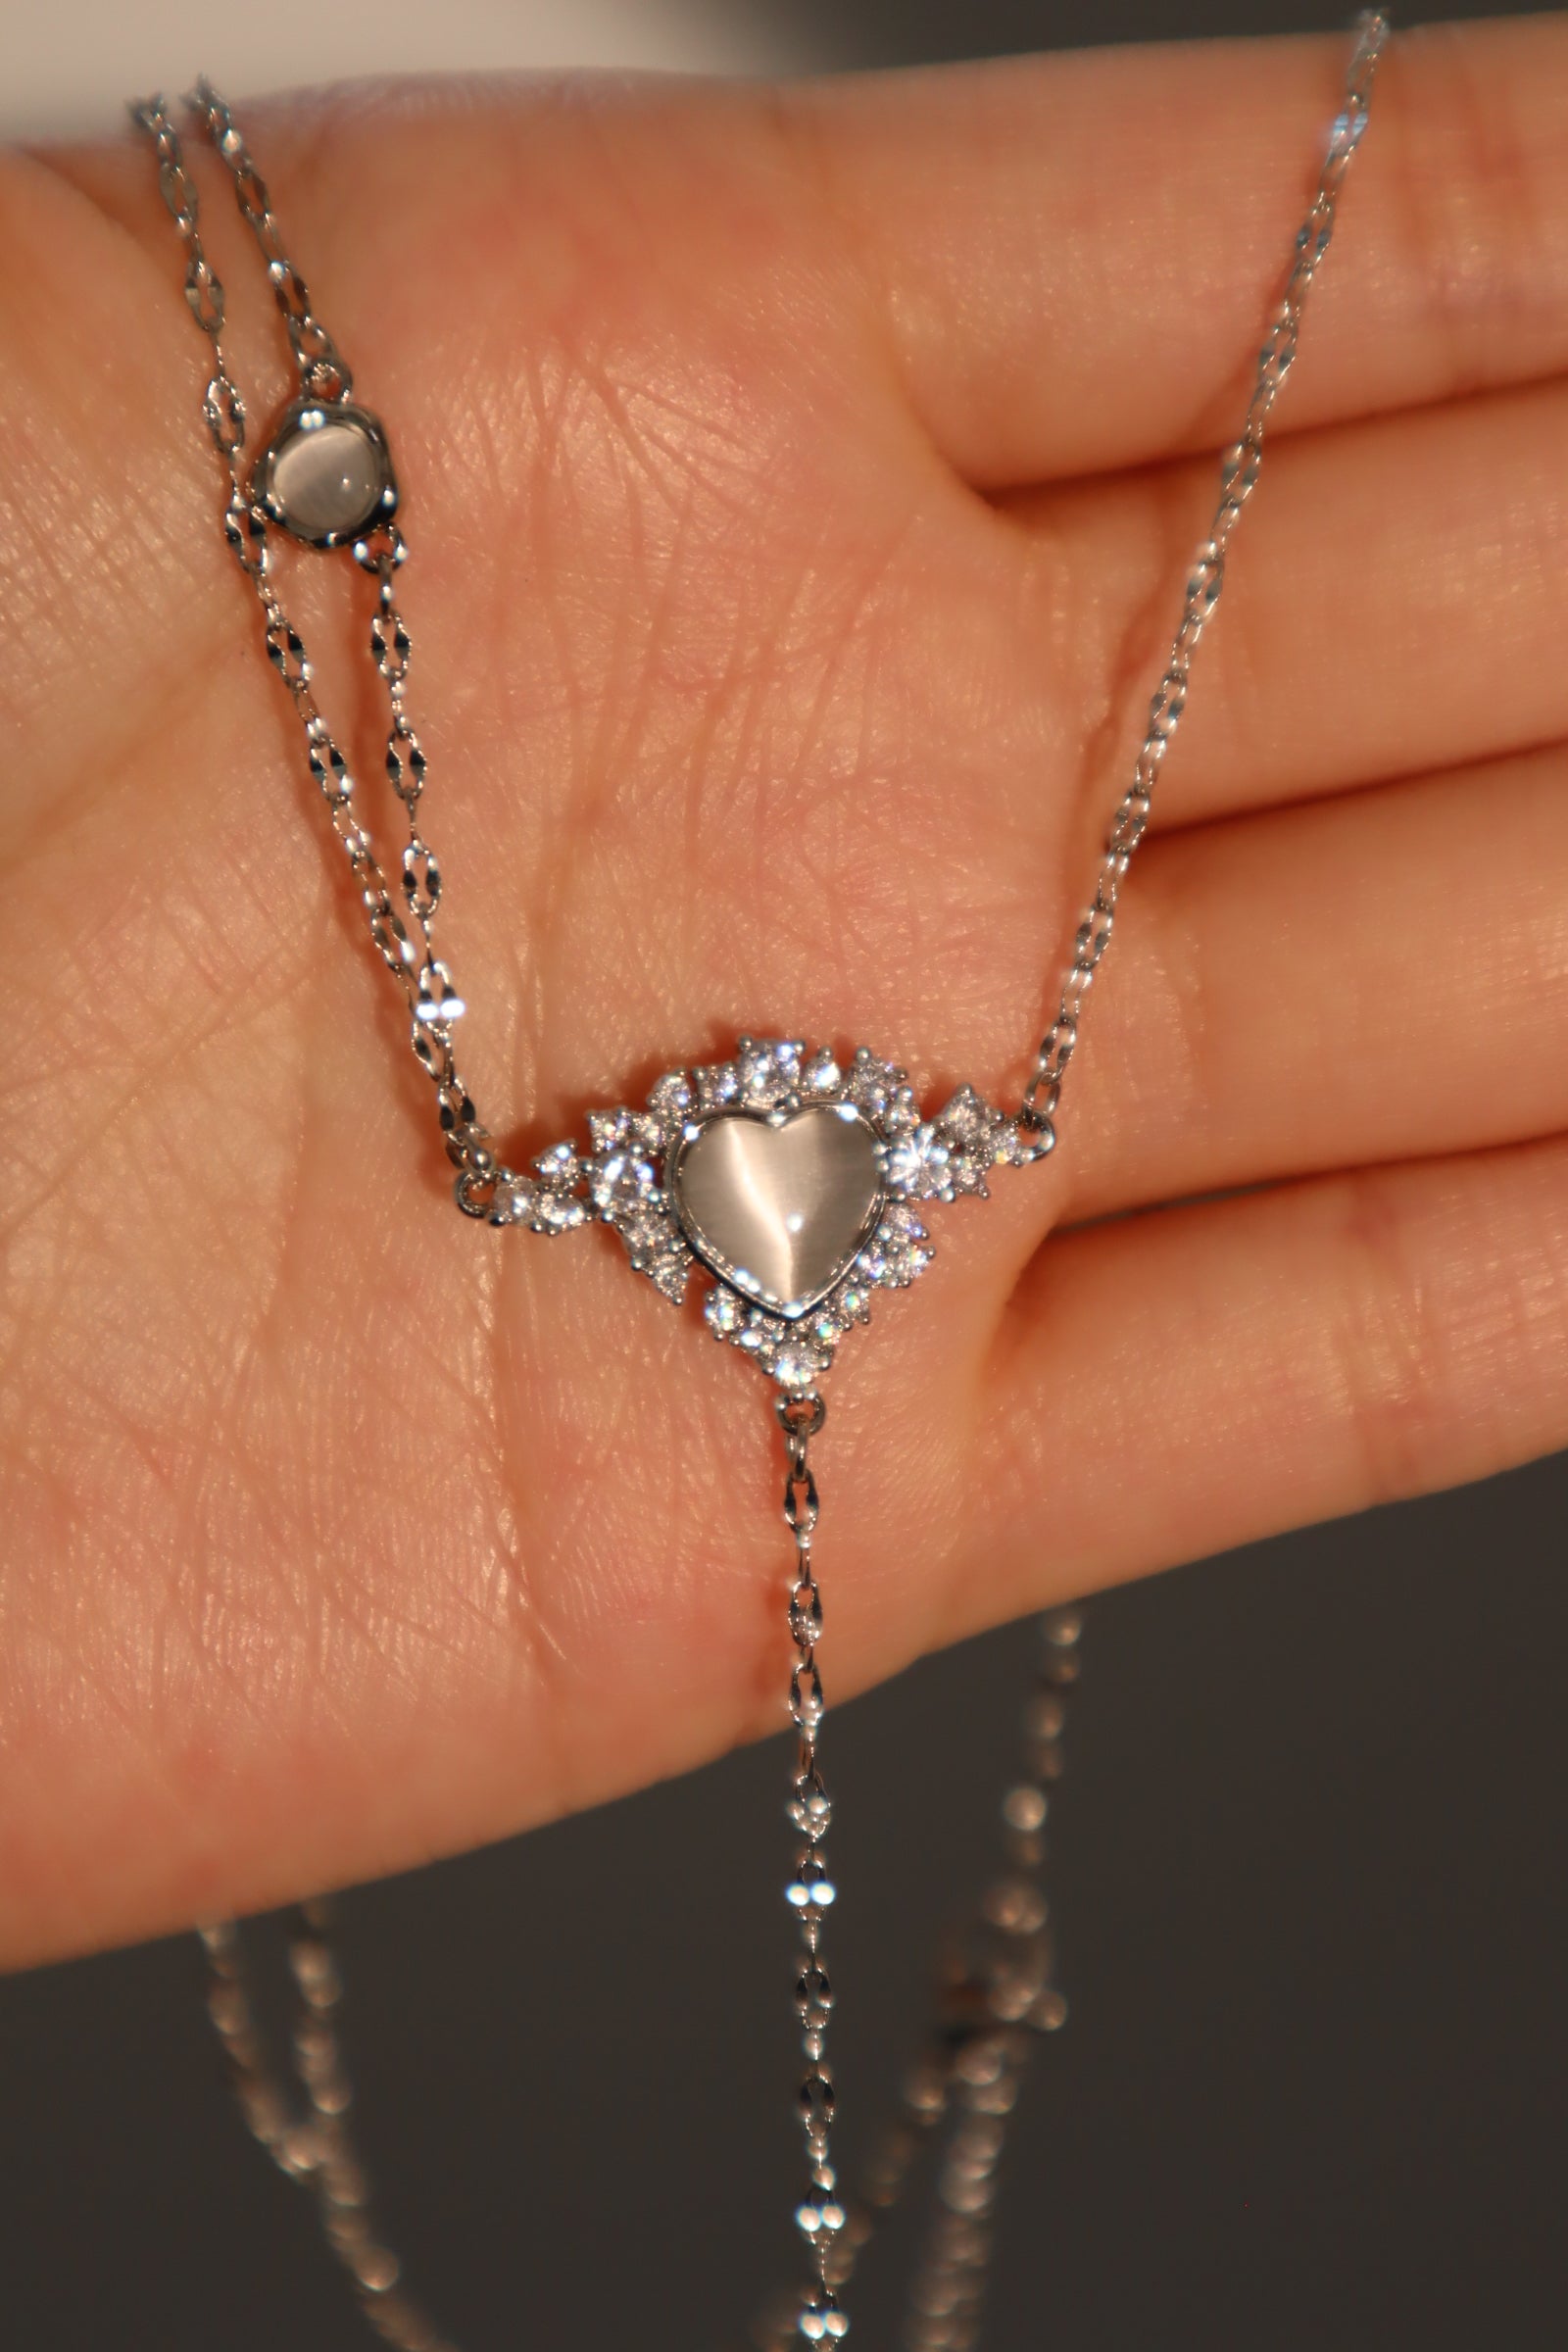 White Opal Heart Necklace